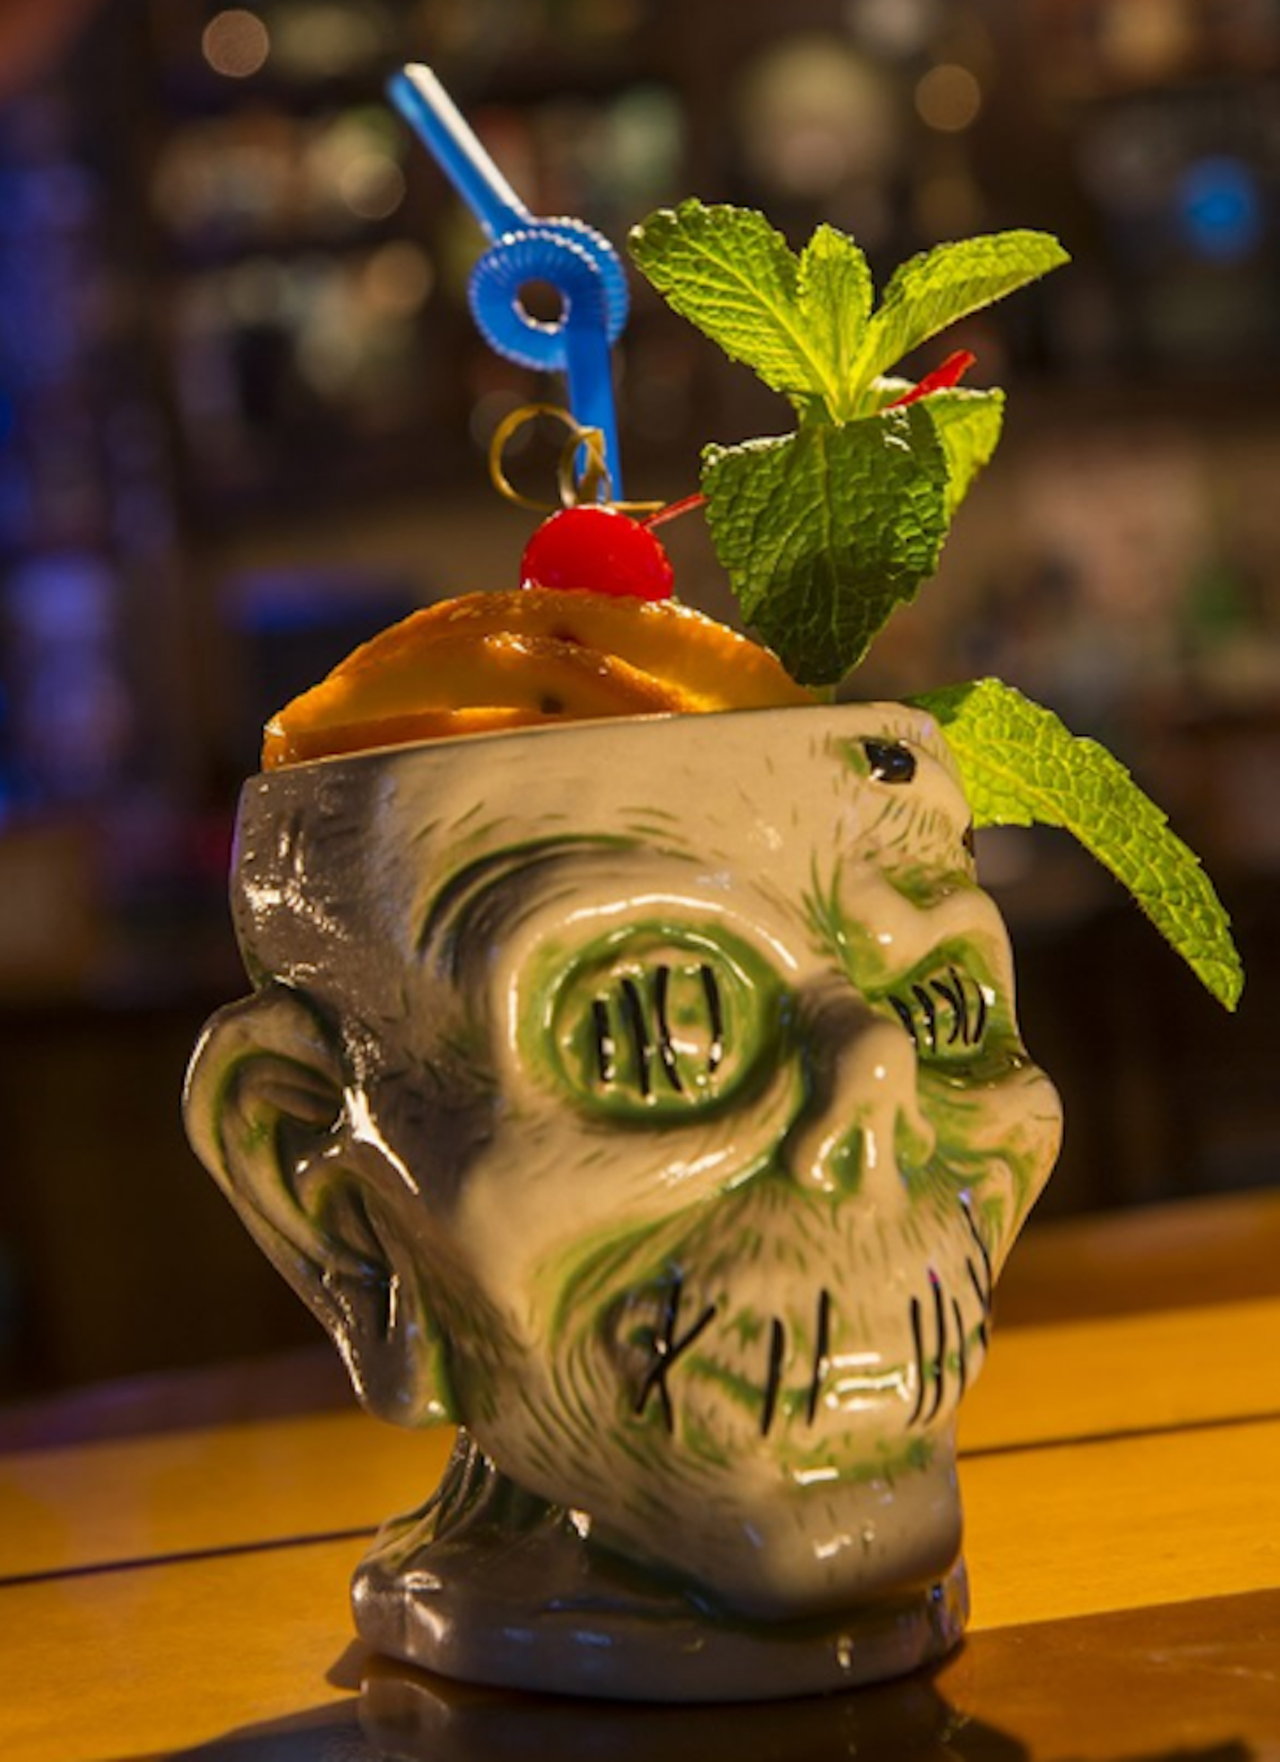 Best Tiki Drink: Shrunken Zombie Head at Trader Sam&#146;s Grog Grotto
Disney's Polynesian Village Resort, 1600 Seven Seas Drive, 407-824-2000,
Disney World
It's sticky and sweet and fruity and just screams "I'm on vacation, bitches!" (the dangerous combo of three different aged rums, fruit juice and falernum means you better be), but the best part about this not-cheap cocktail, an homage to the tiki craze of the 1960s, is that you get to keep the vessel the concoction comes in &#150; a ceramic shrunken head replica.
Photo courtesy of WDW